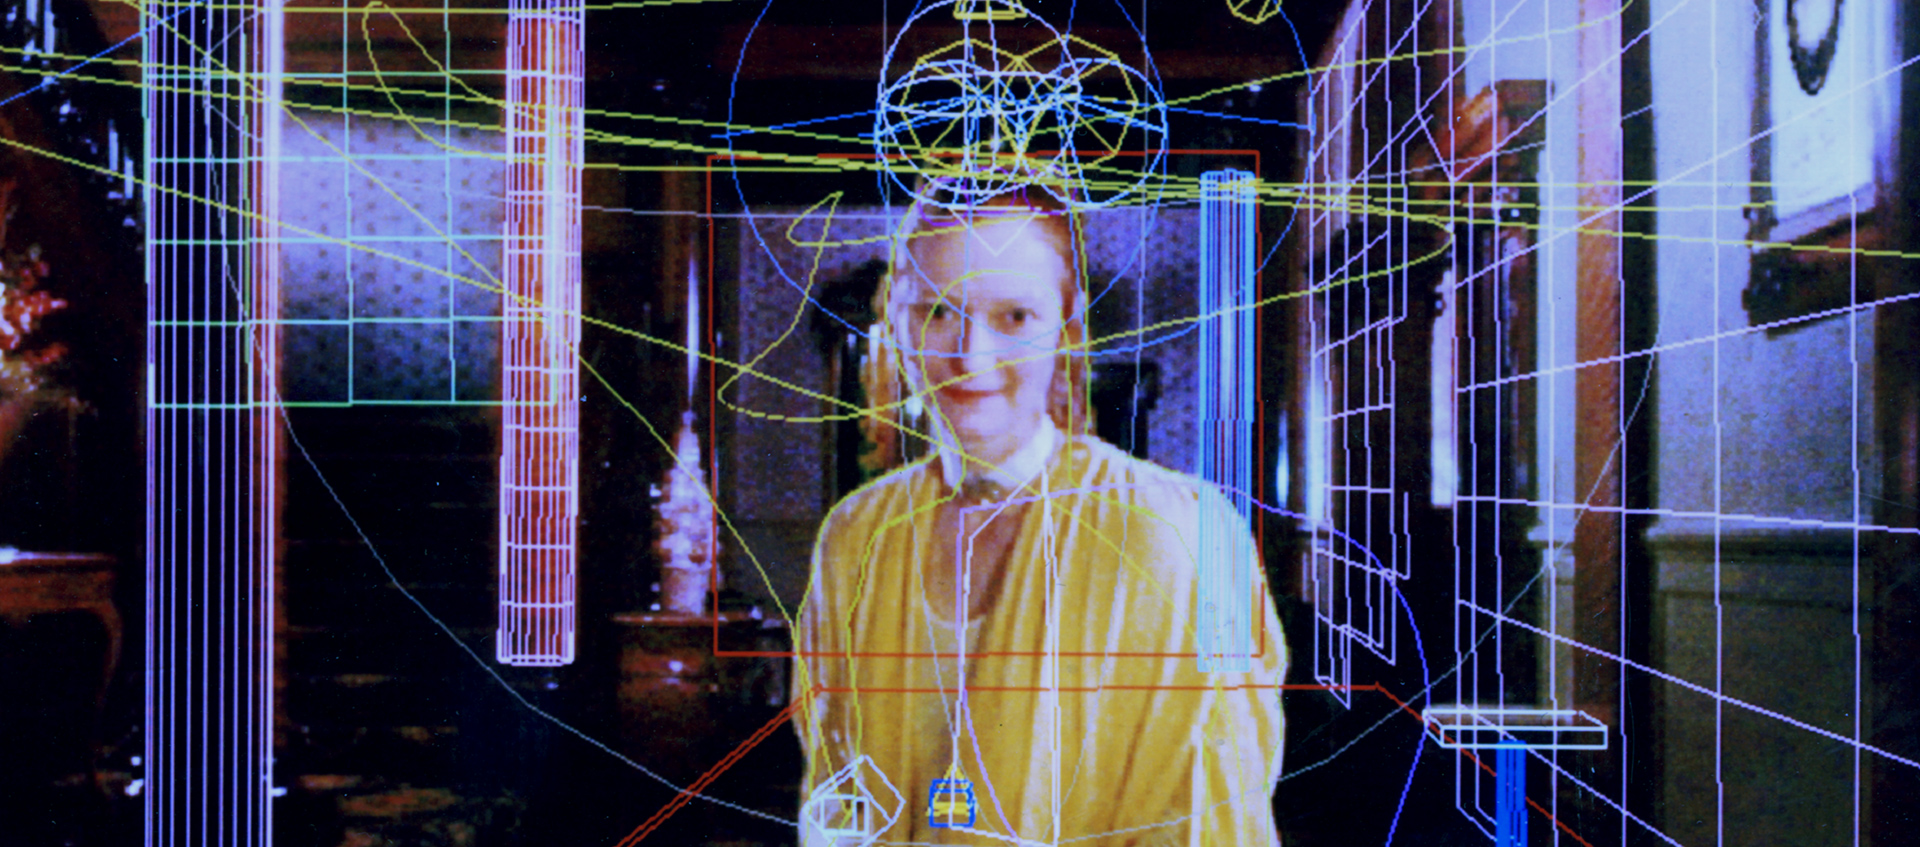 An image of Tilda Swinton wearing an all yellow outfit. She stares at the viewer and in her hands sits a digitally drawn bird. The image itself is overlaid with multi-colored lines and digital shapes